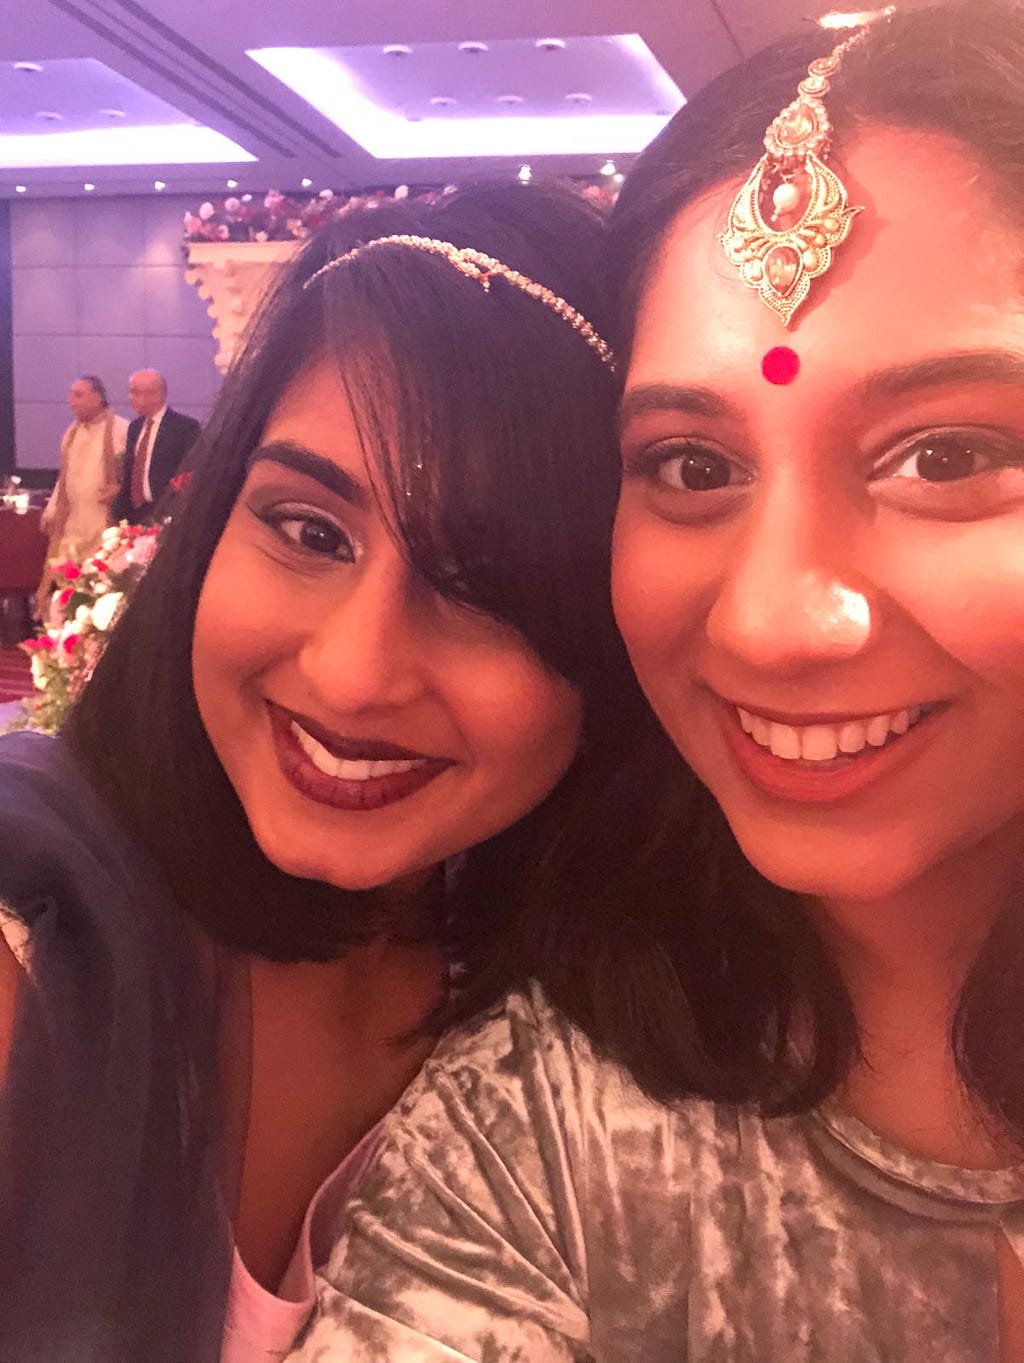 My cousin and I at our cousins wedding. I am the one with the fringe!